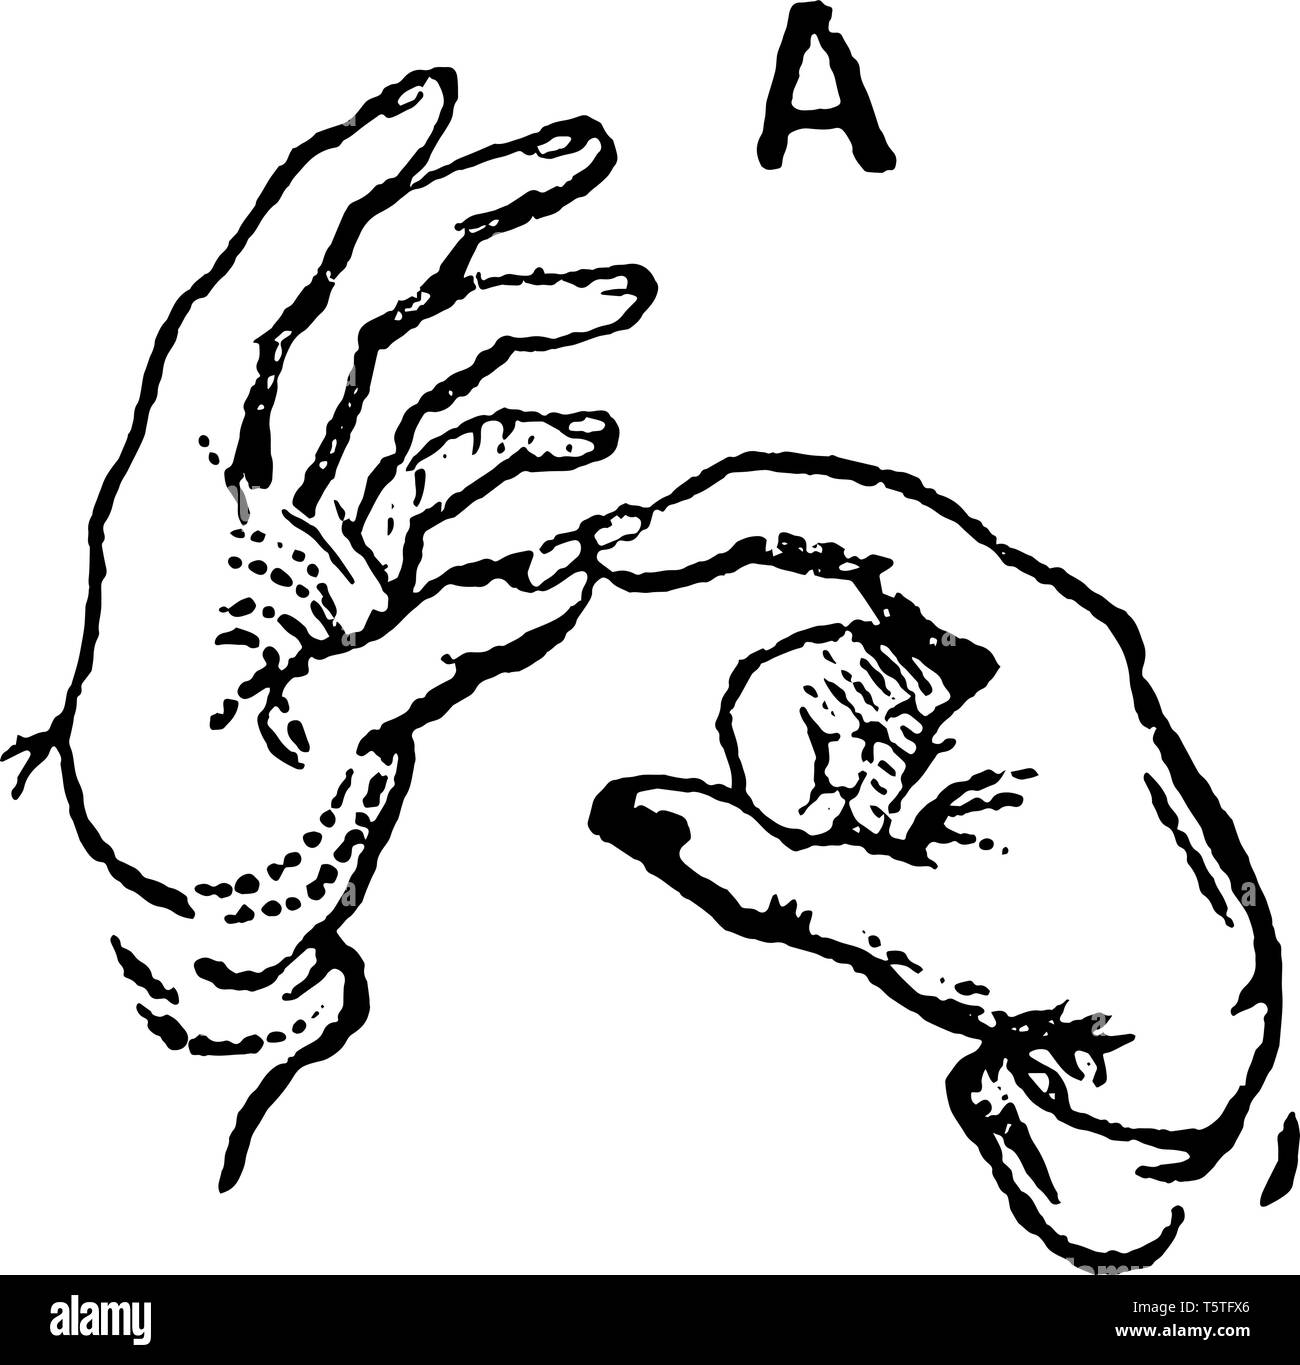 Two handed sign language Stock Vector Images - Alamy